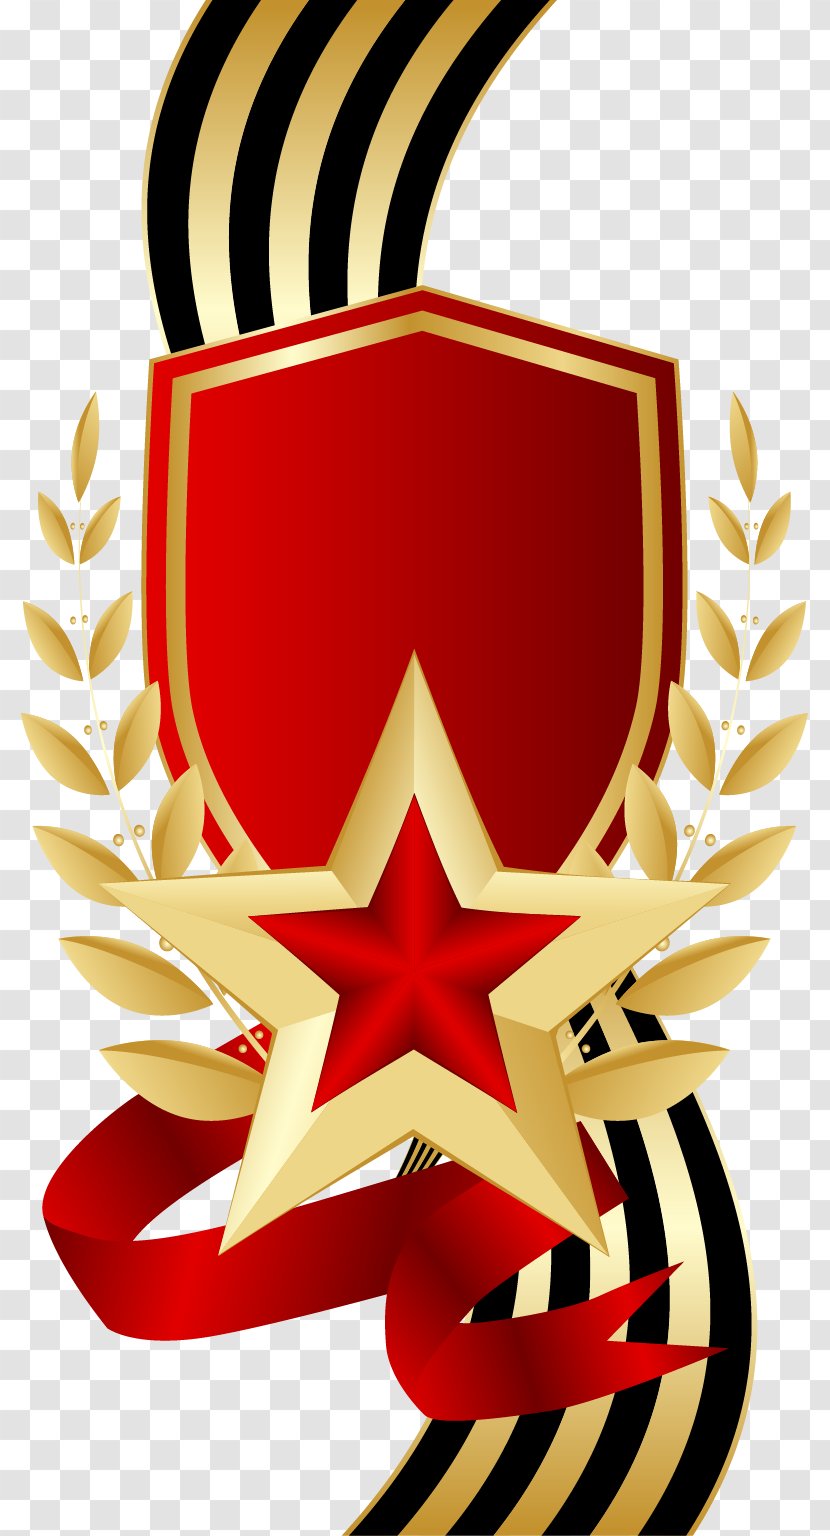 Clip Art - Victory Day - 9 Transparent PNG